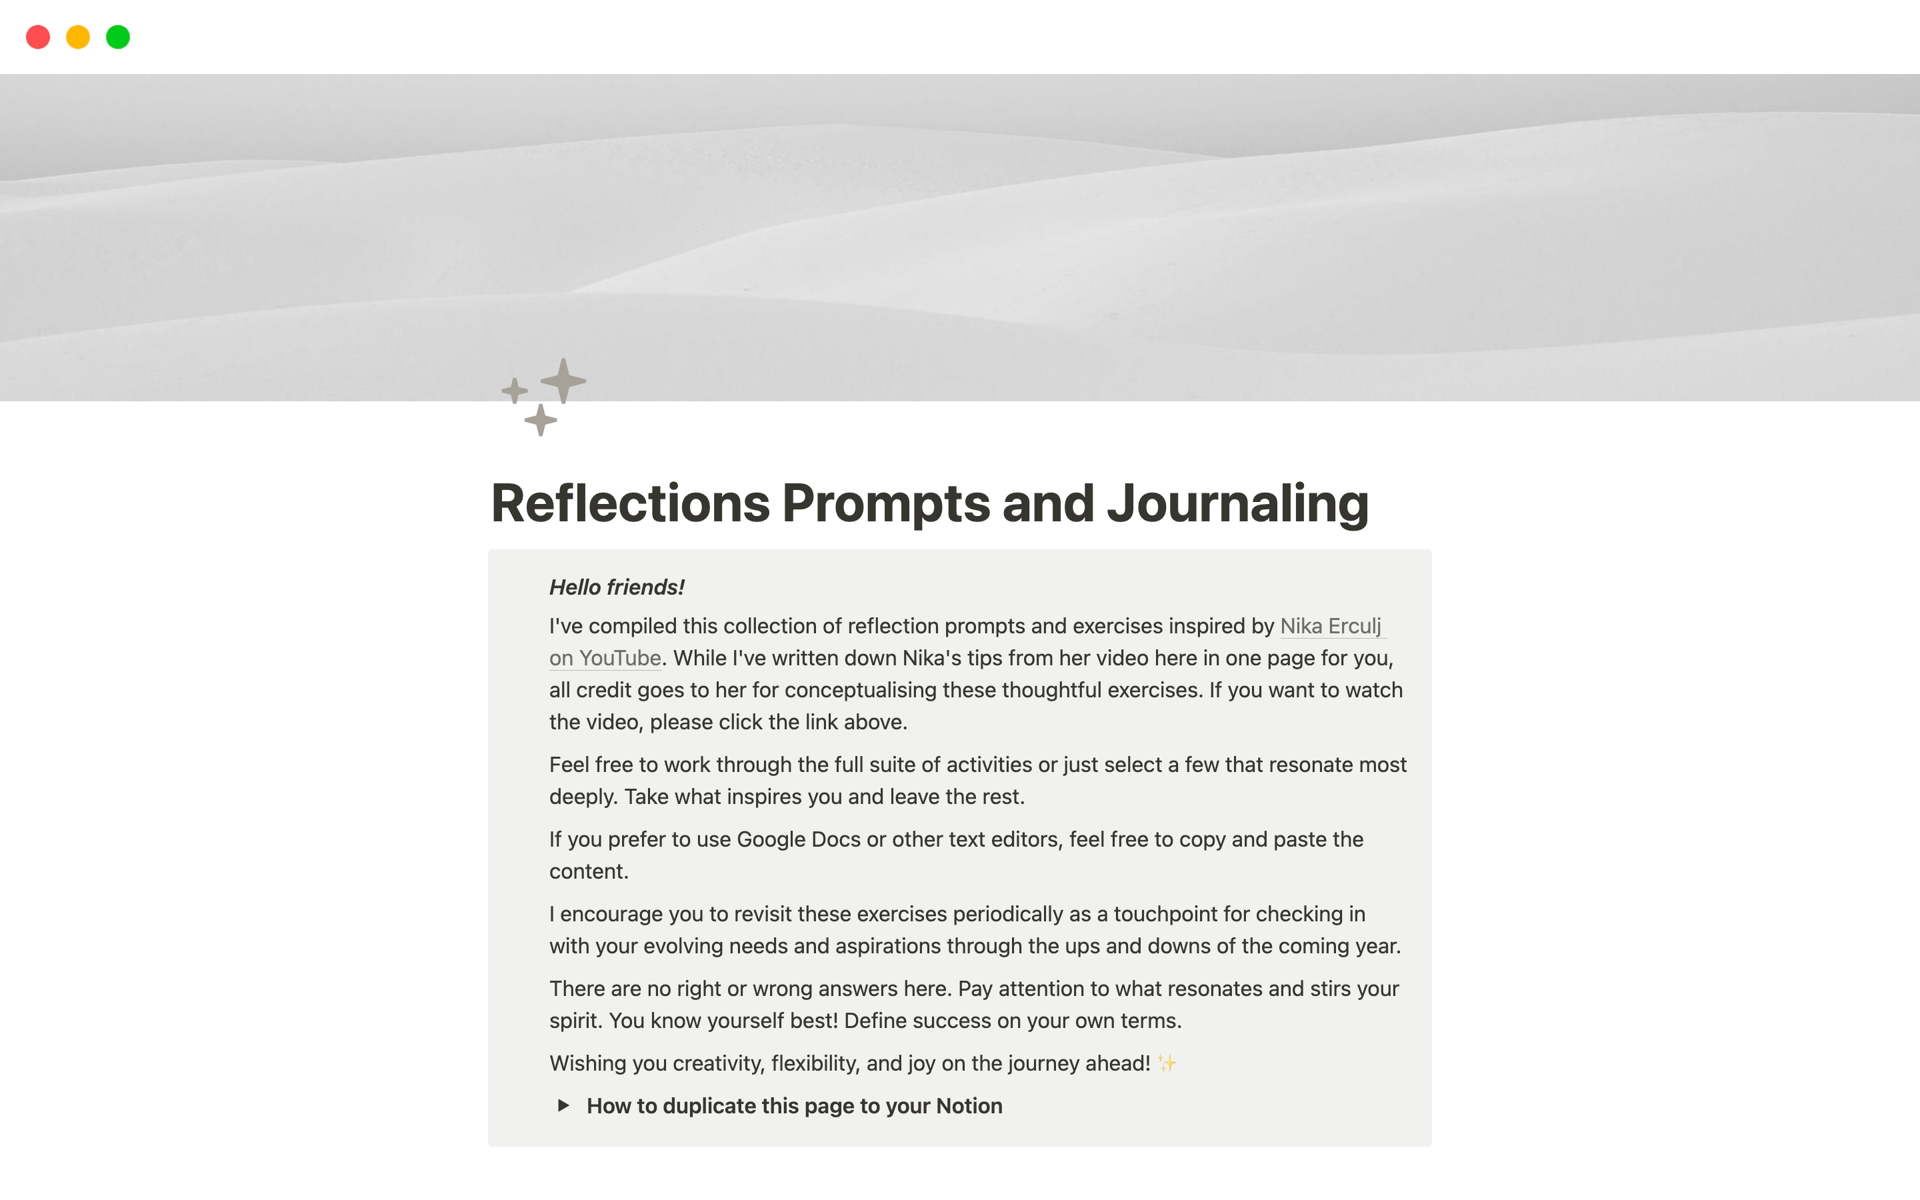 A set of journaling prompts and exercises to help you reflect on the past year in a structured manner, while giving you insight on how to prepare for the year ahead.